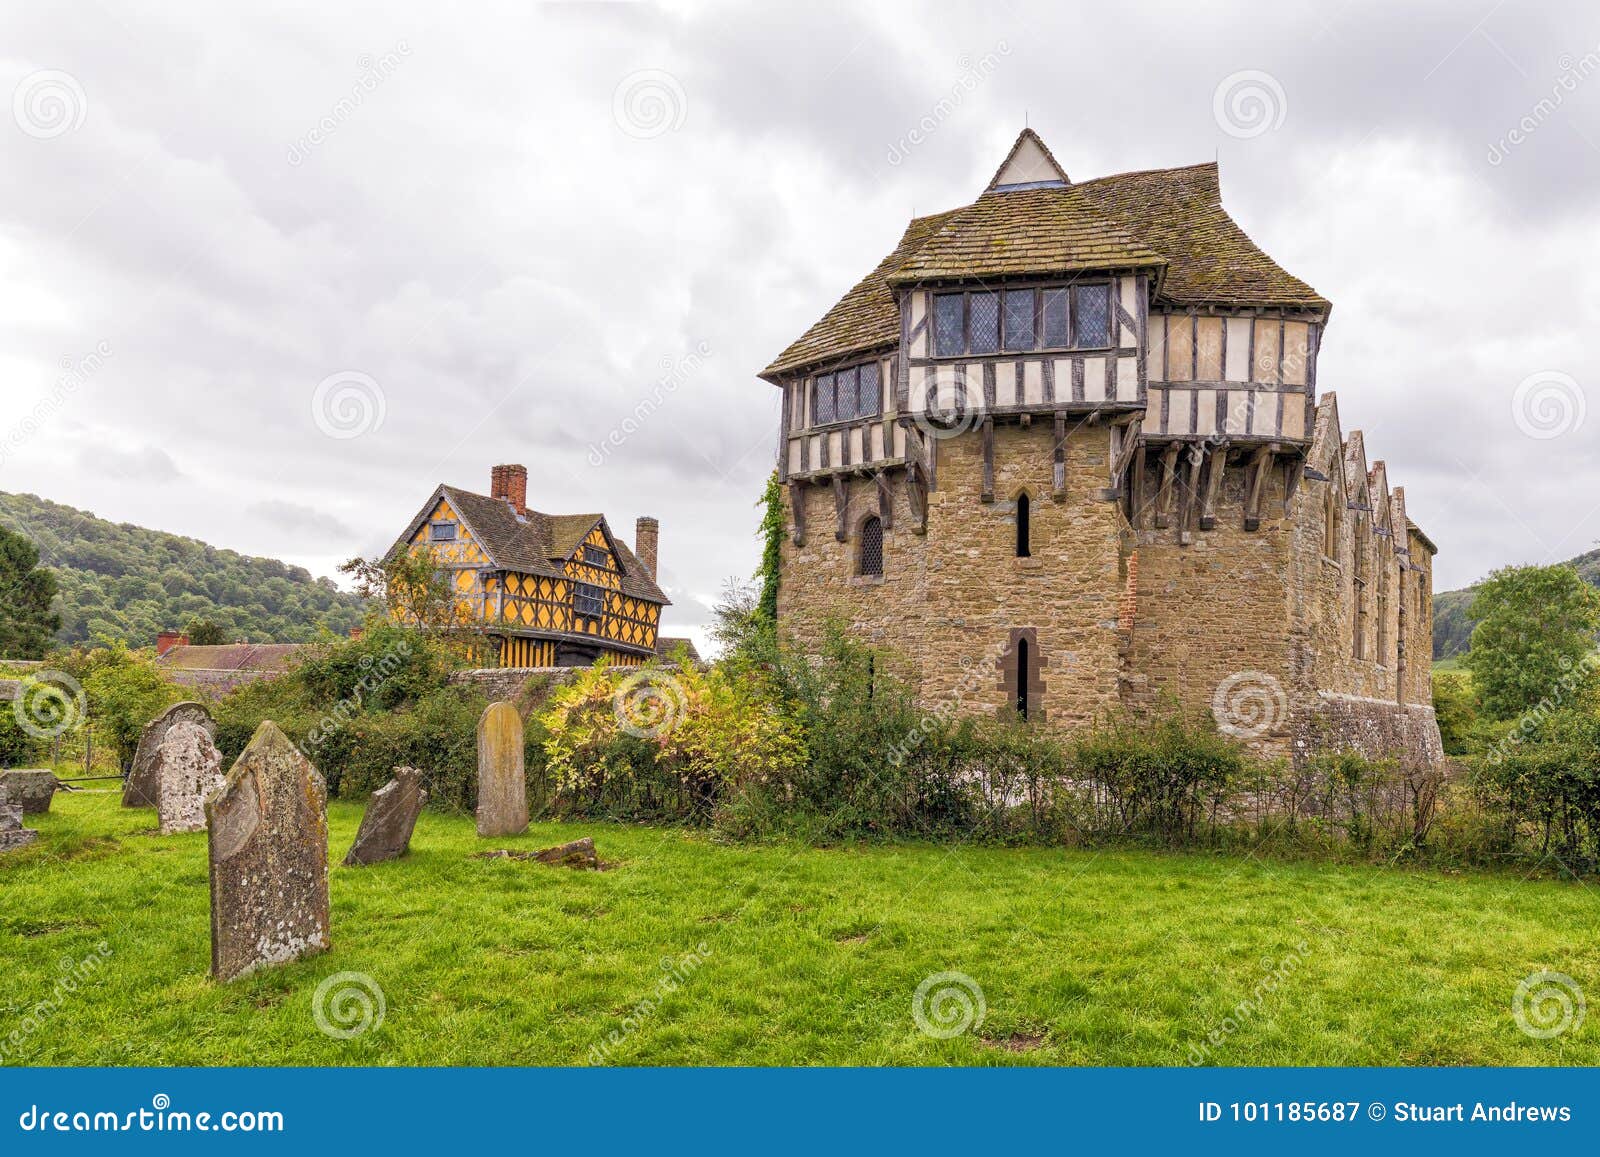 the north tower, stokesay castle, shropshire, england.